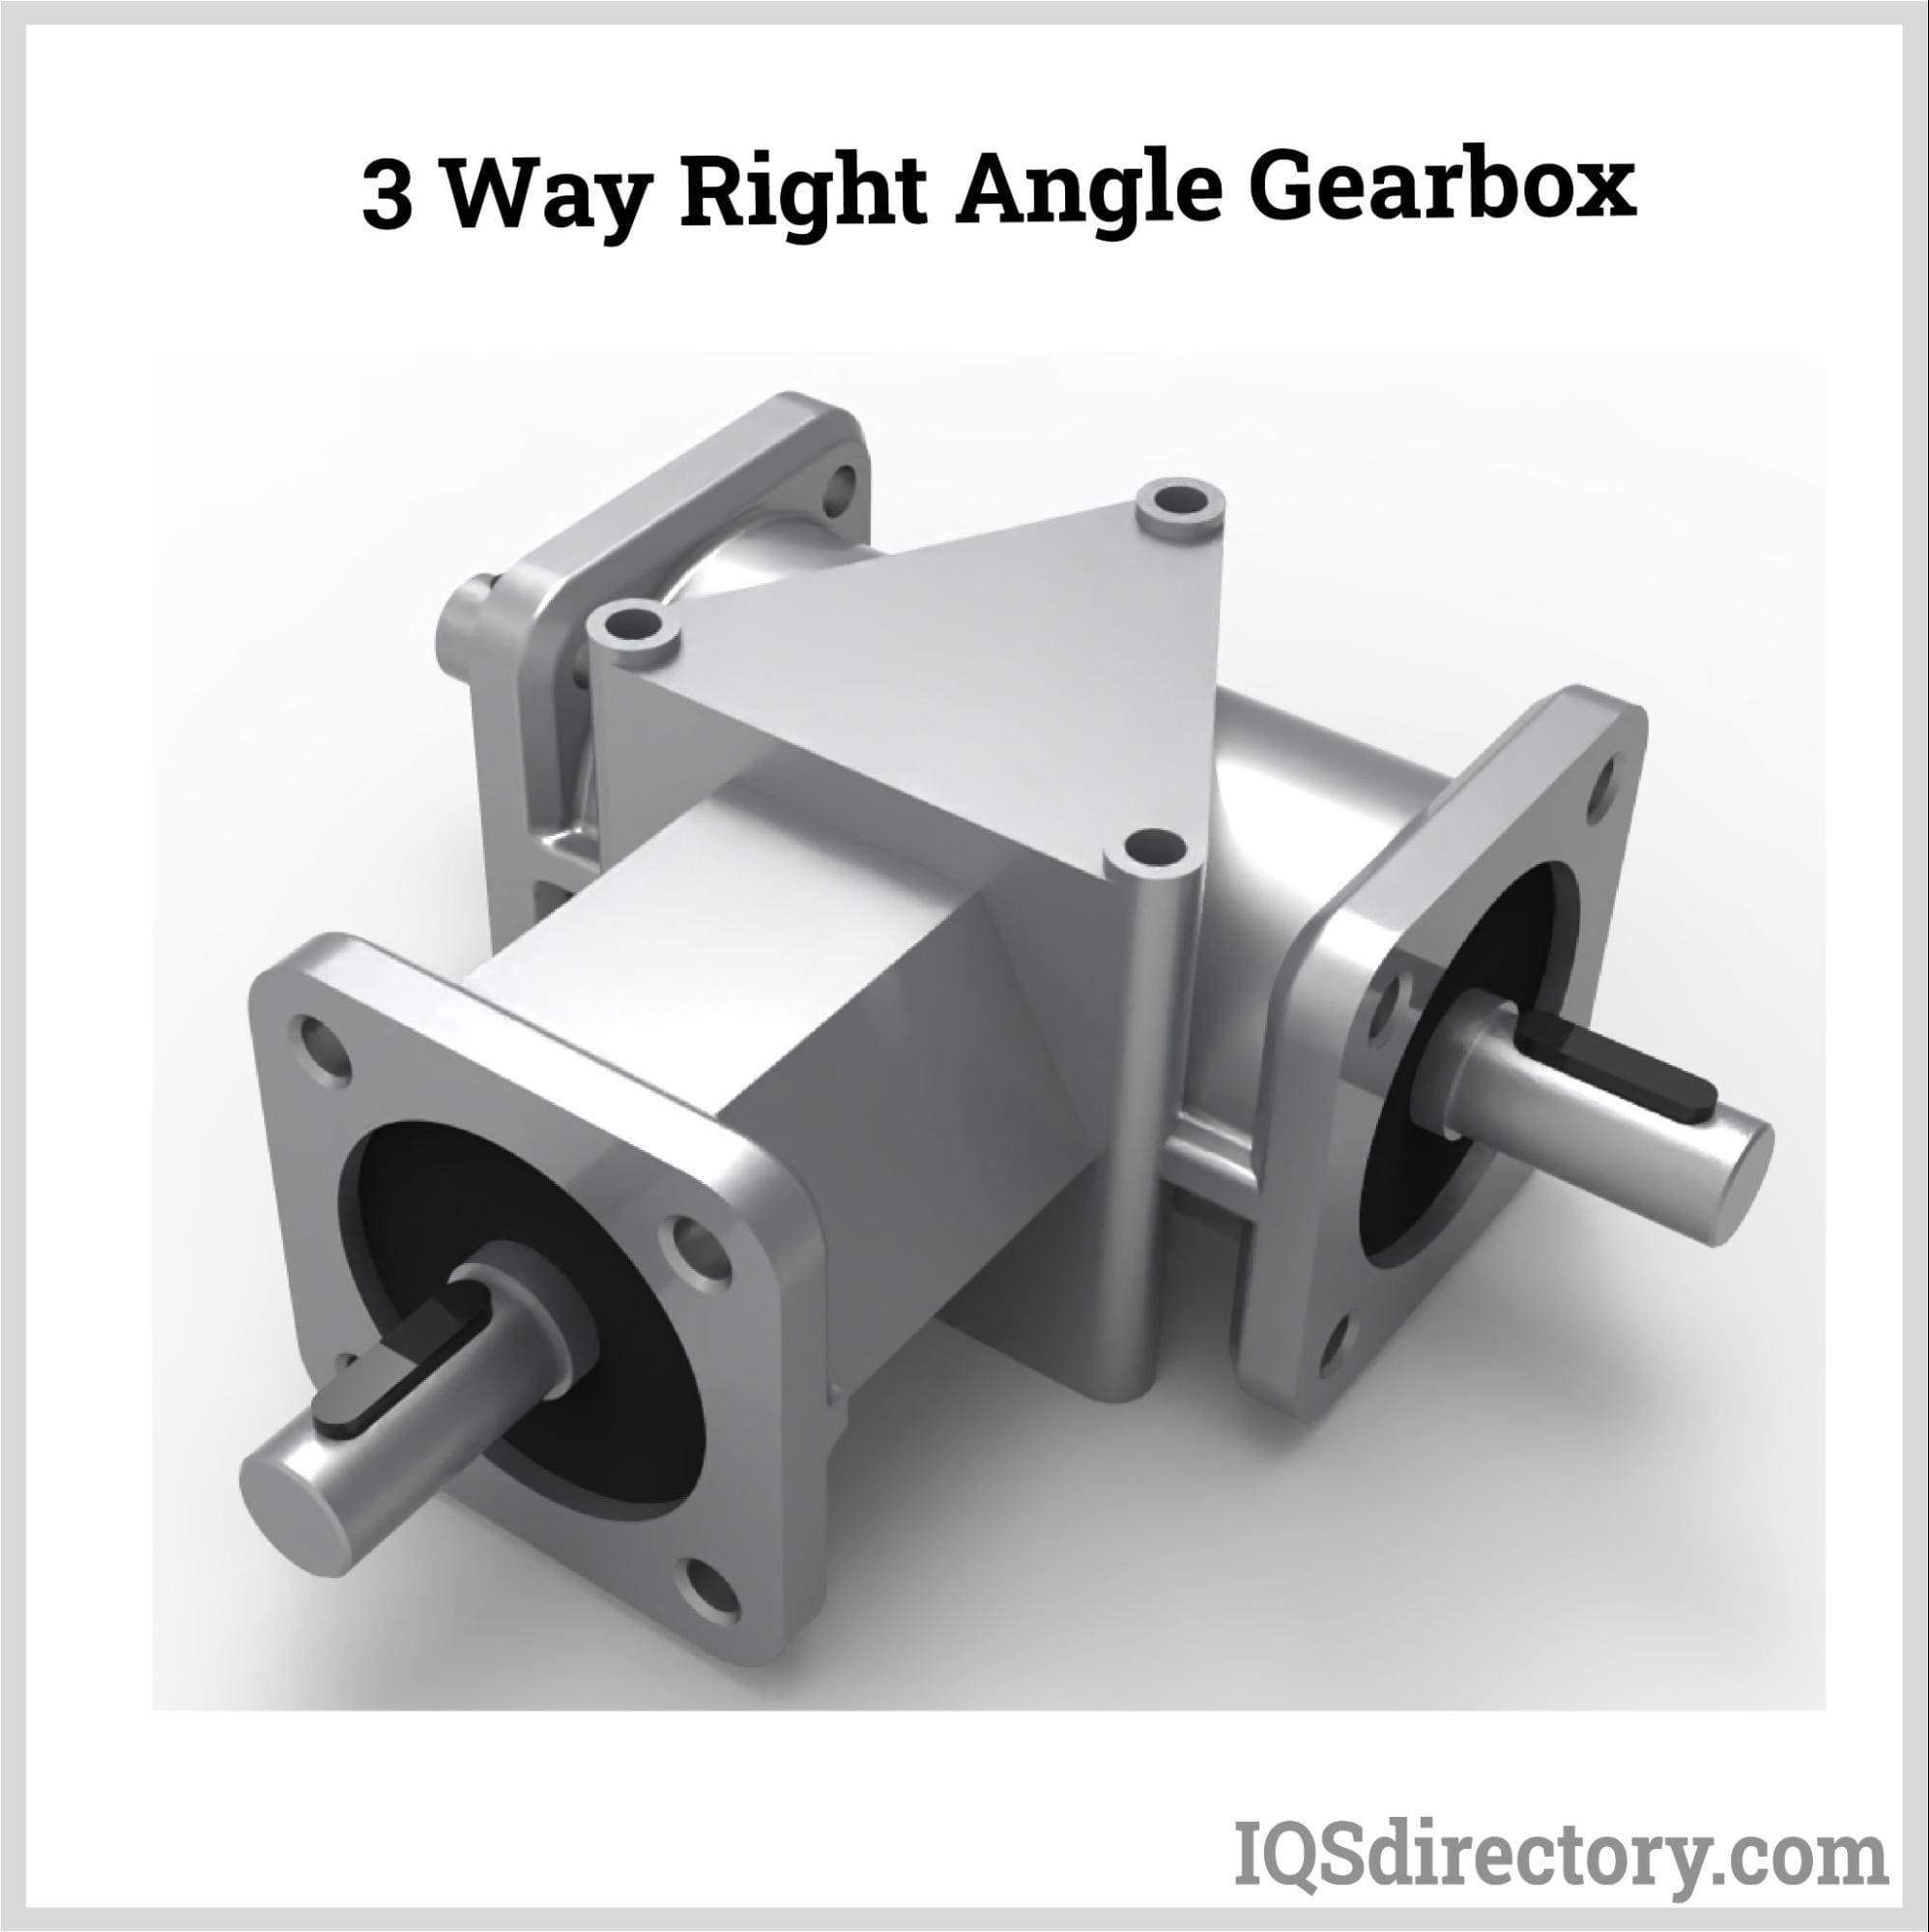 Right Angle Gear Boxes